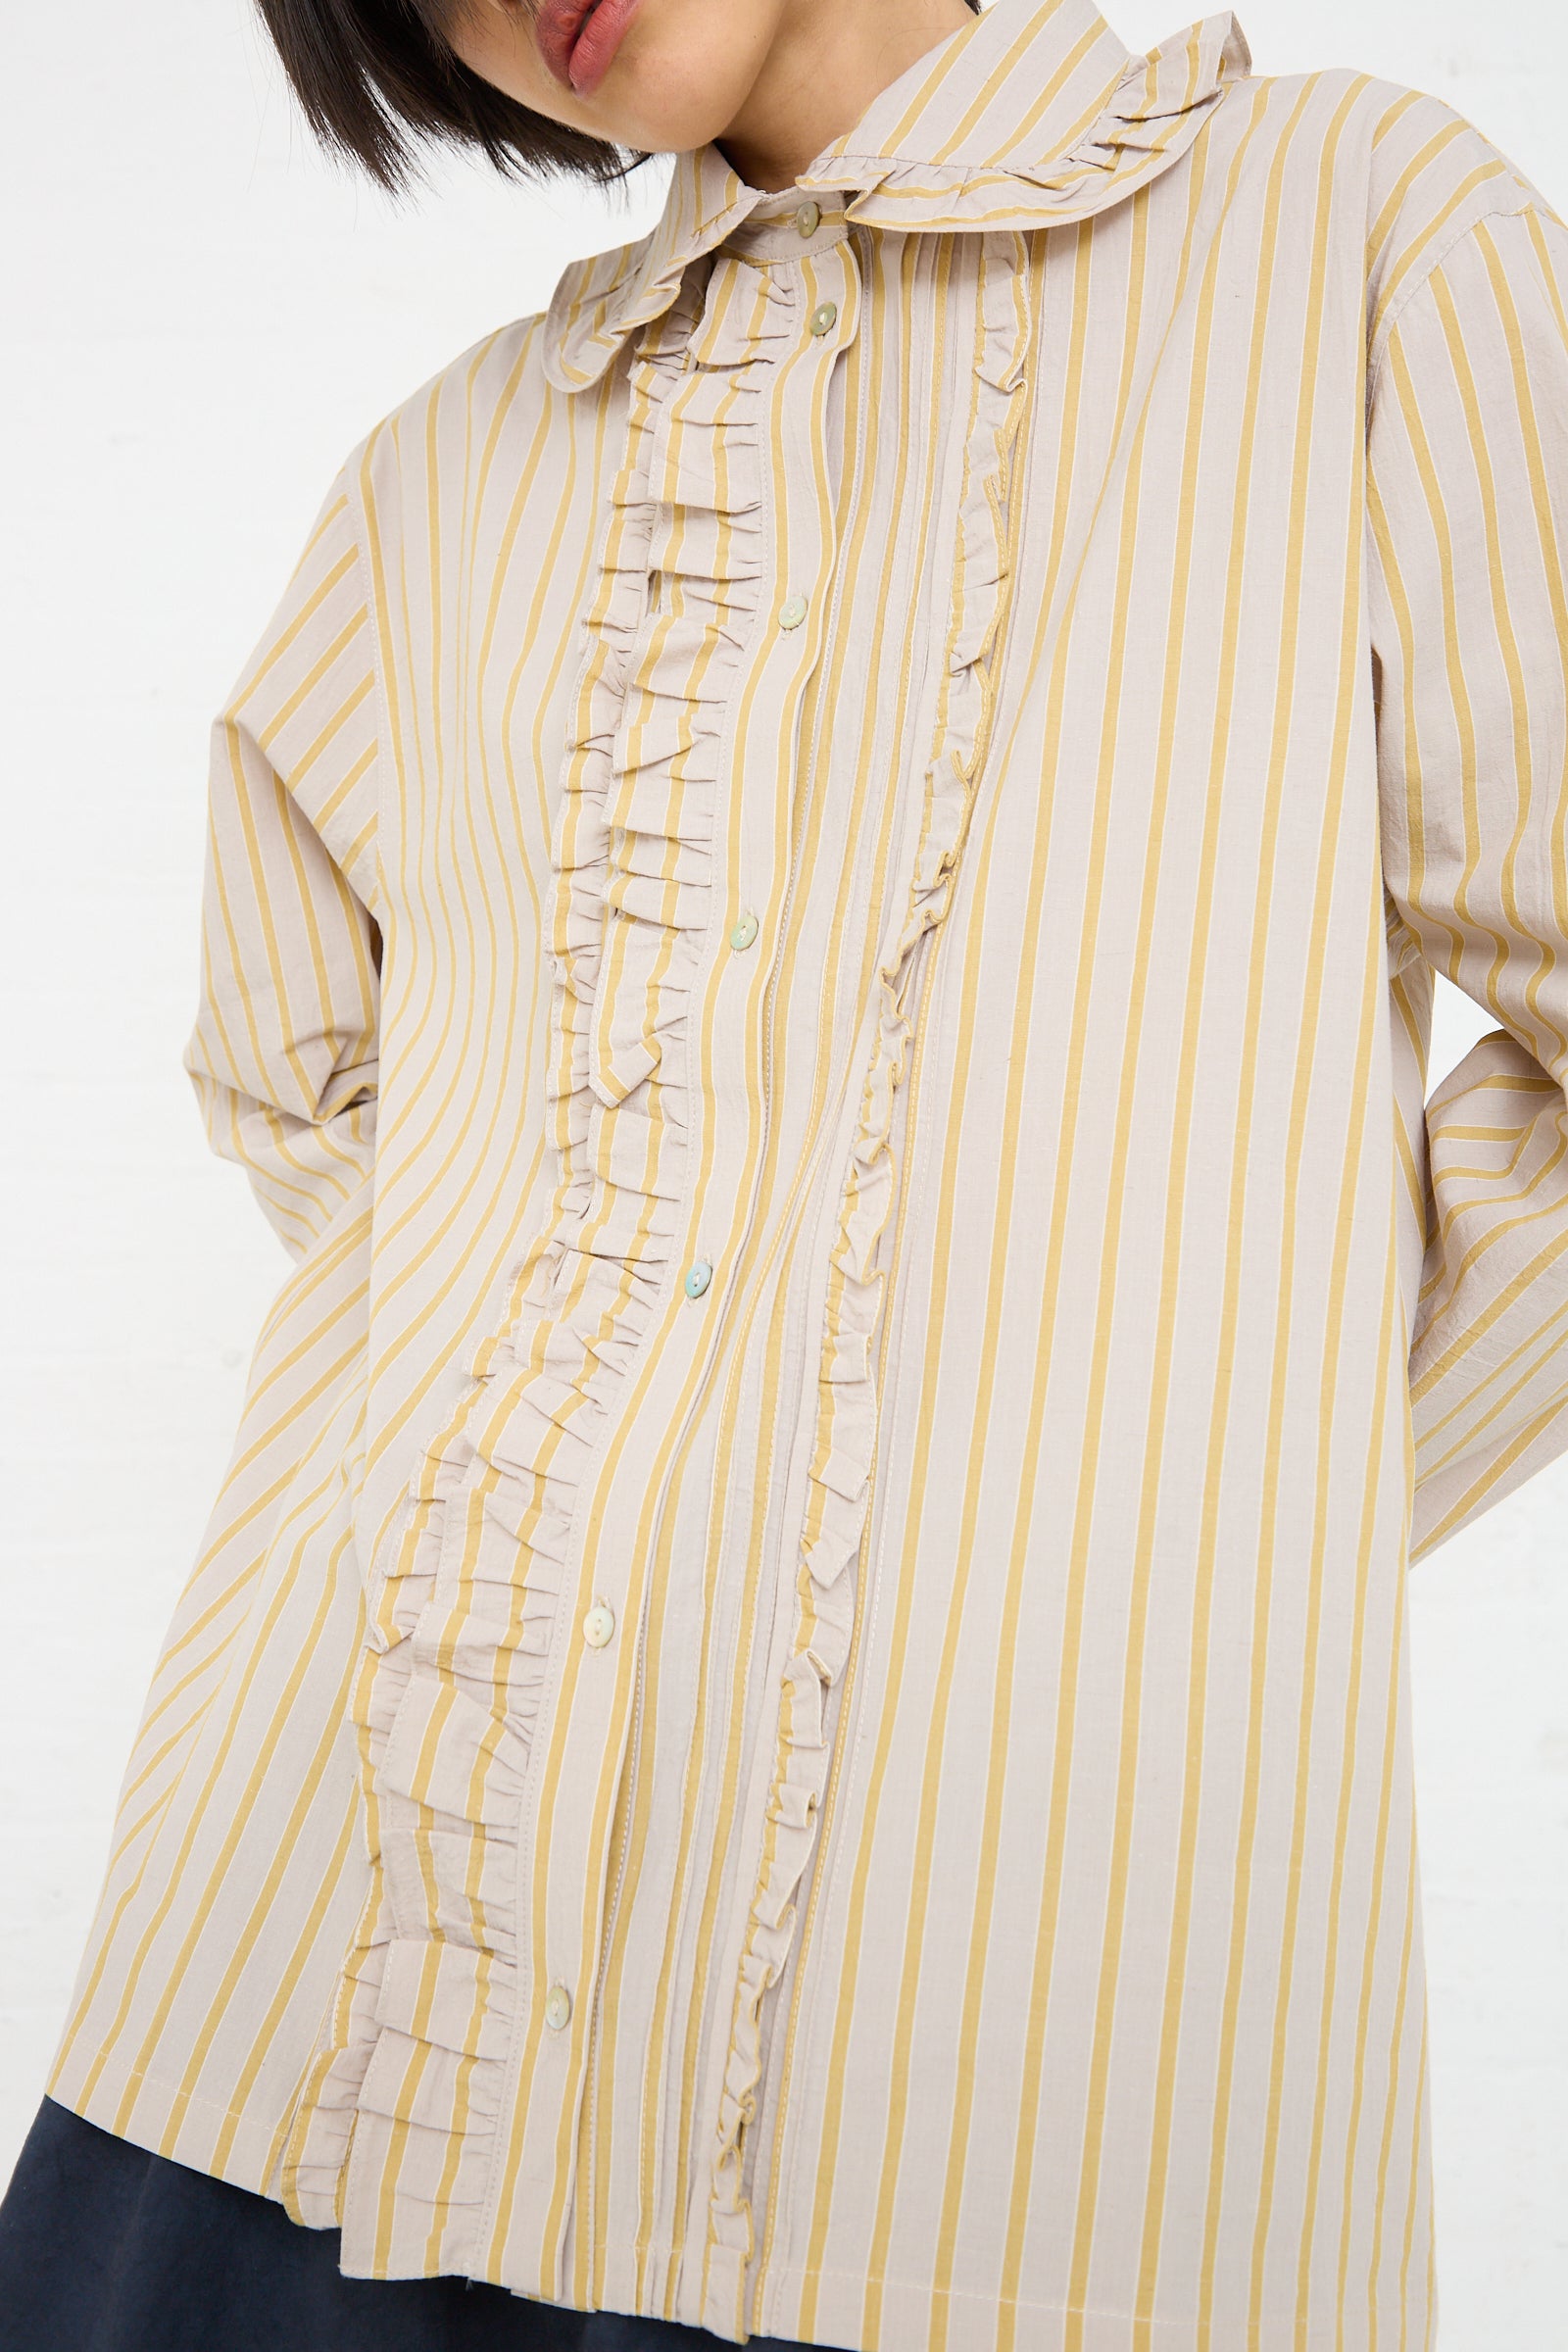 A close-up view of a person wearing a Cawley Japanese Cotton Ruffle Shirt in Sun and Grey with ruffles down the front.